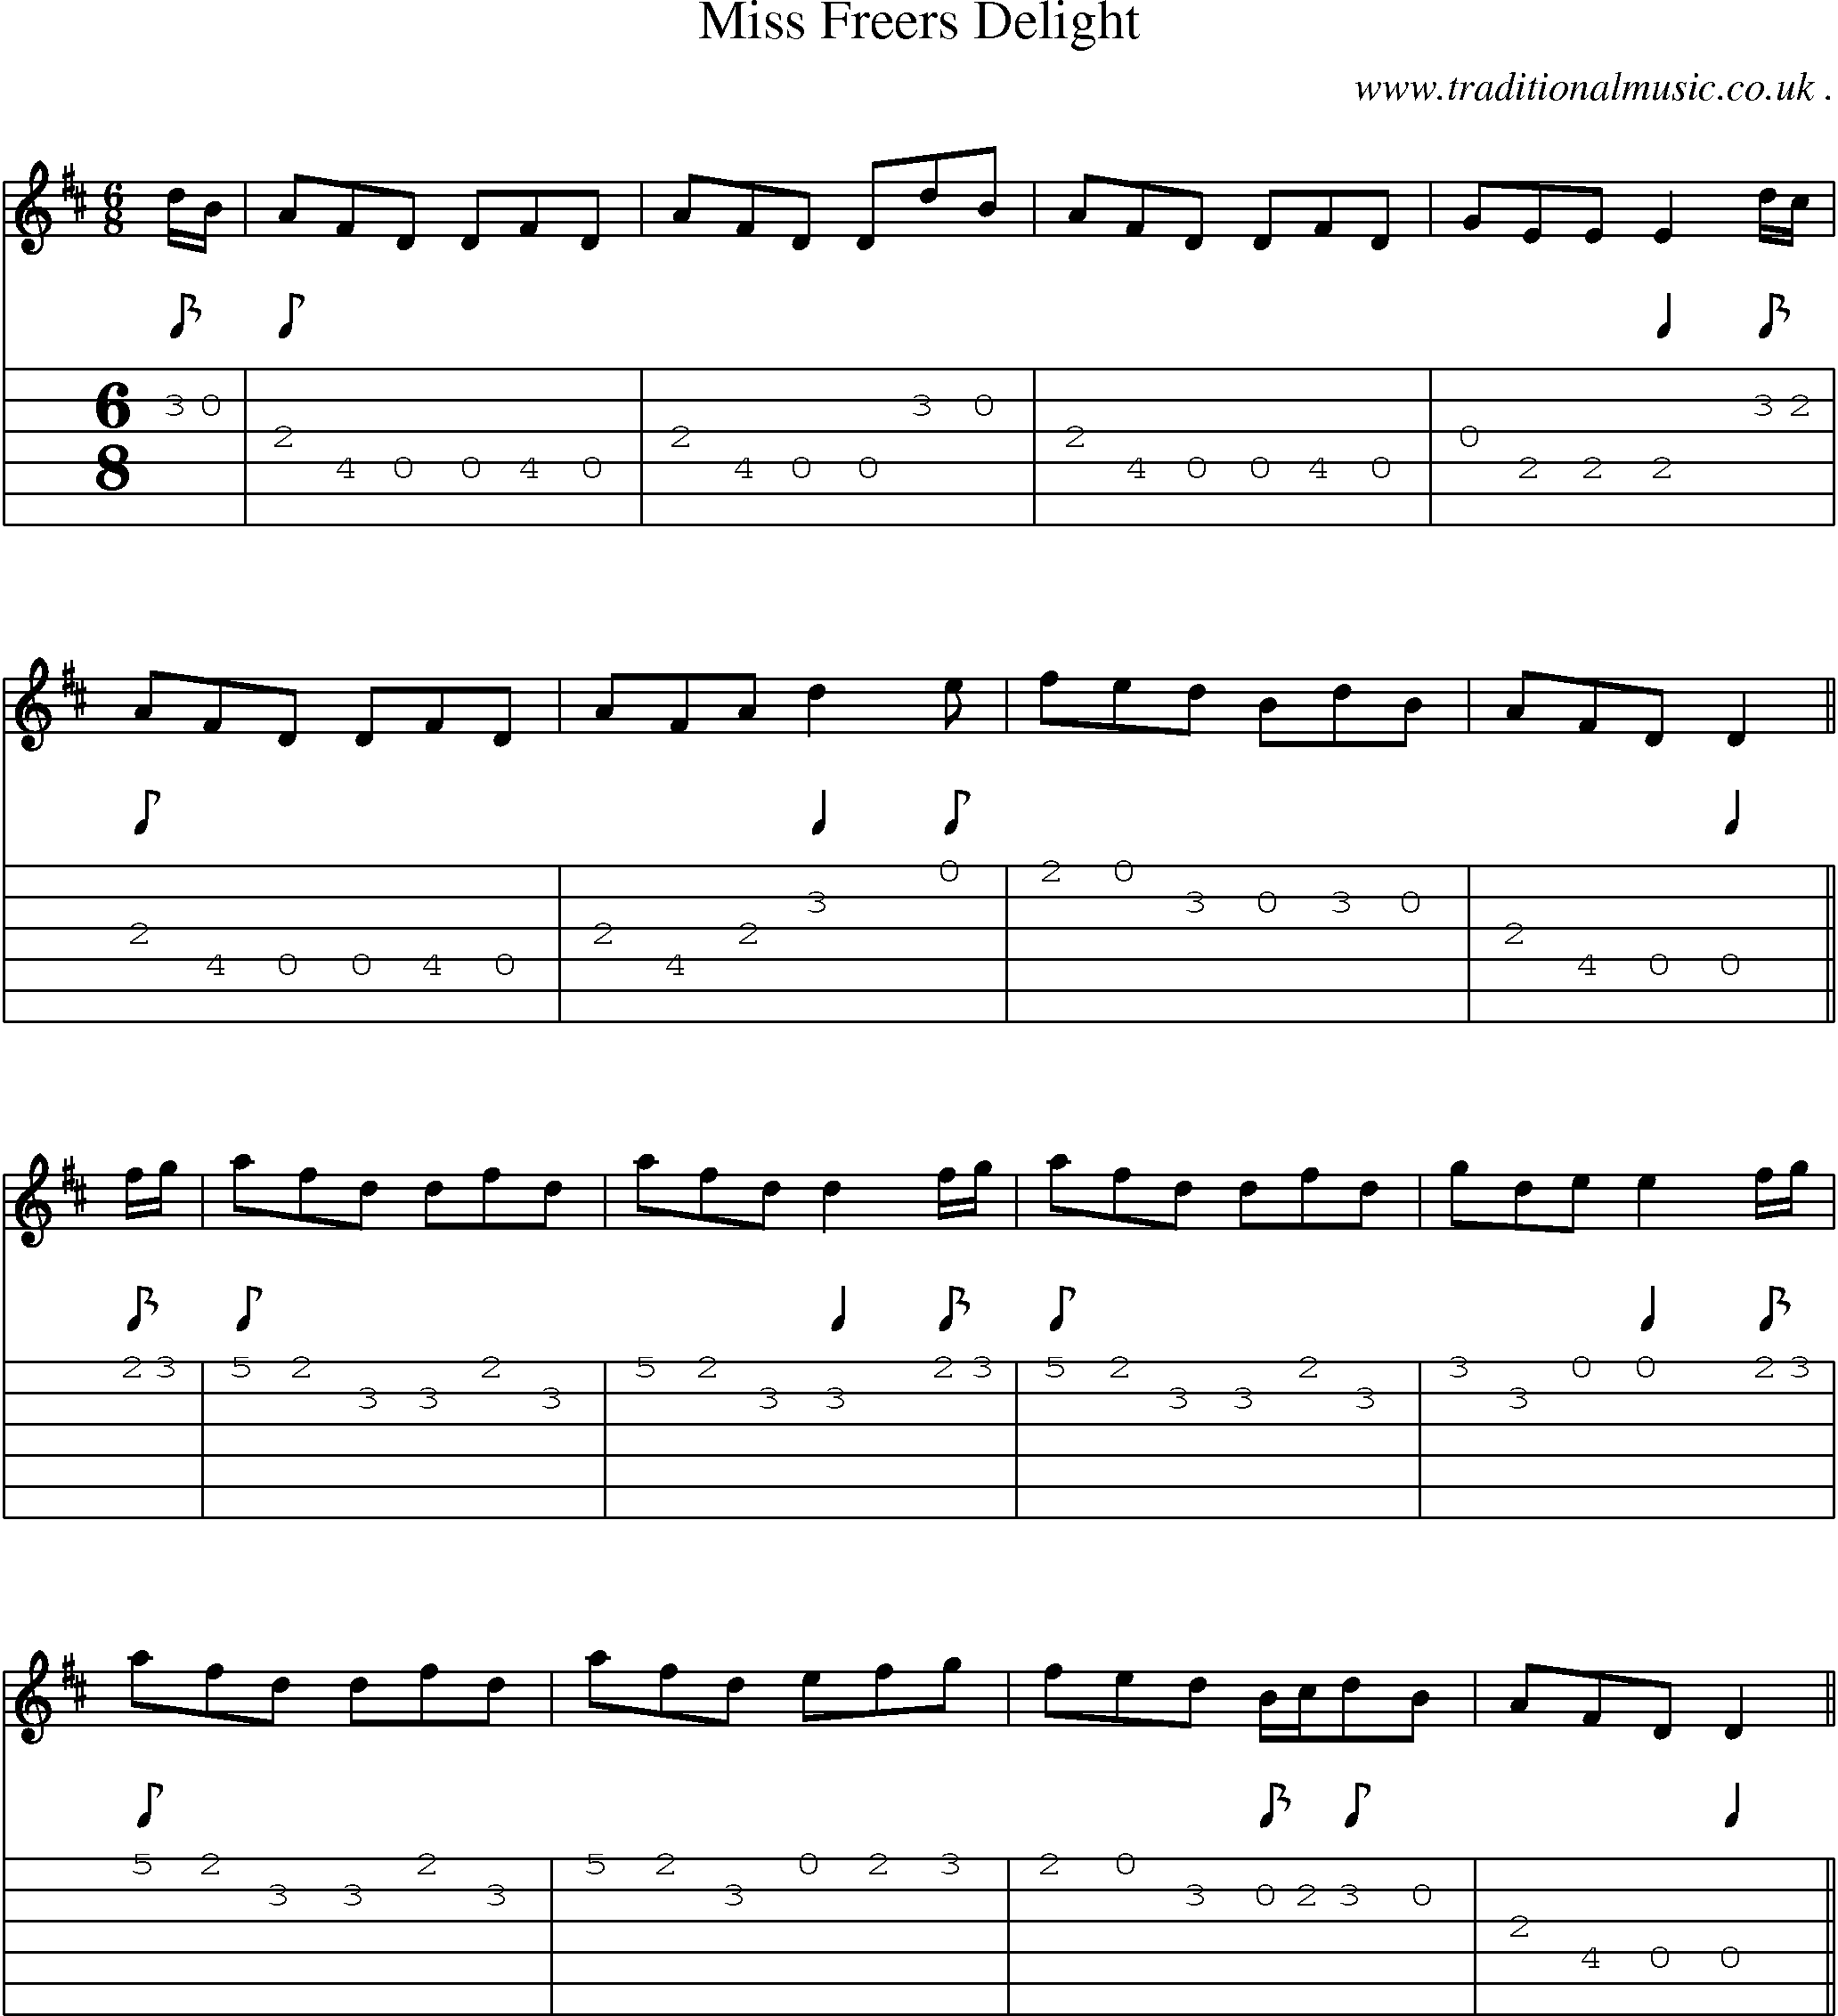 Sheet-Music and Guitar Tabs for Miss Freers Delight